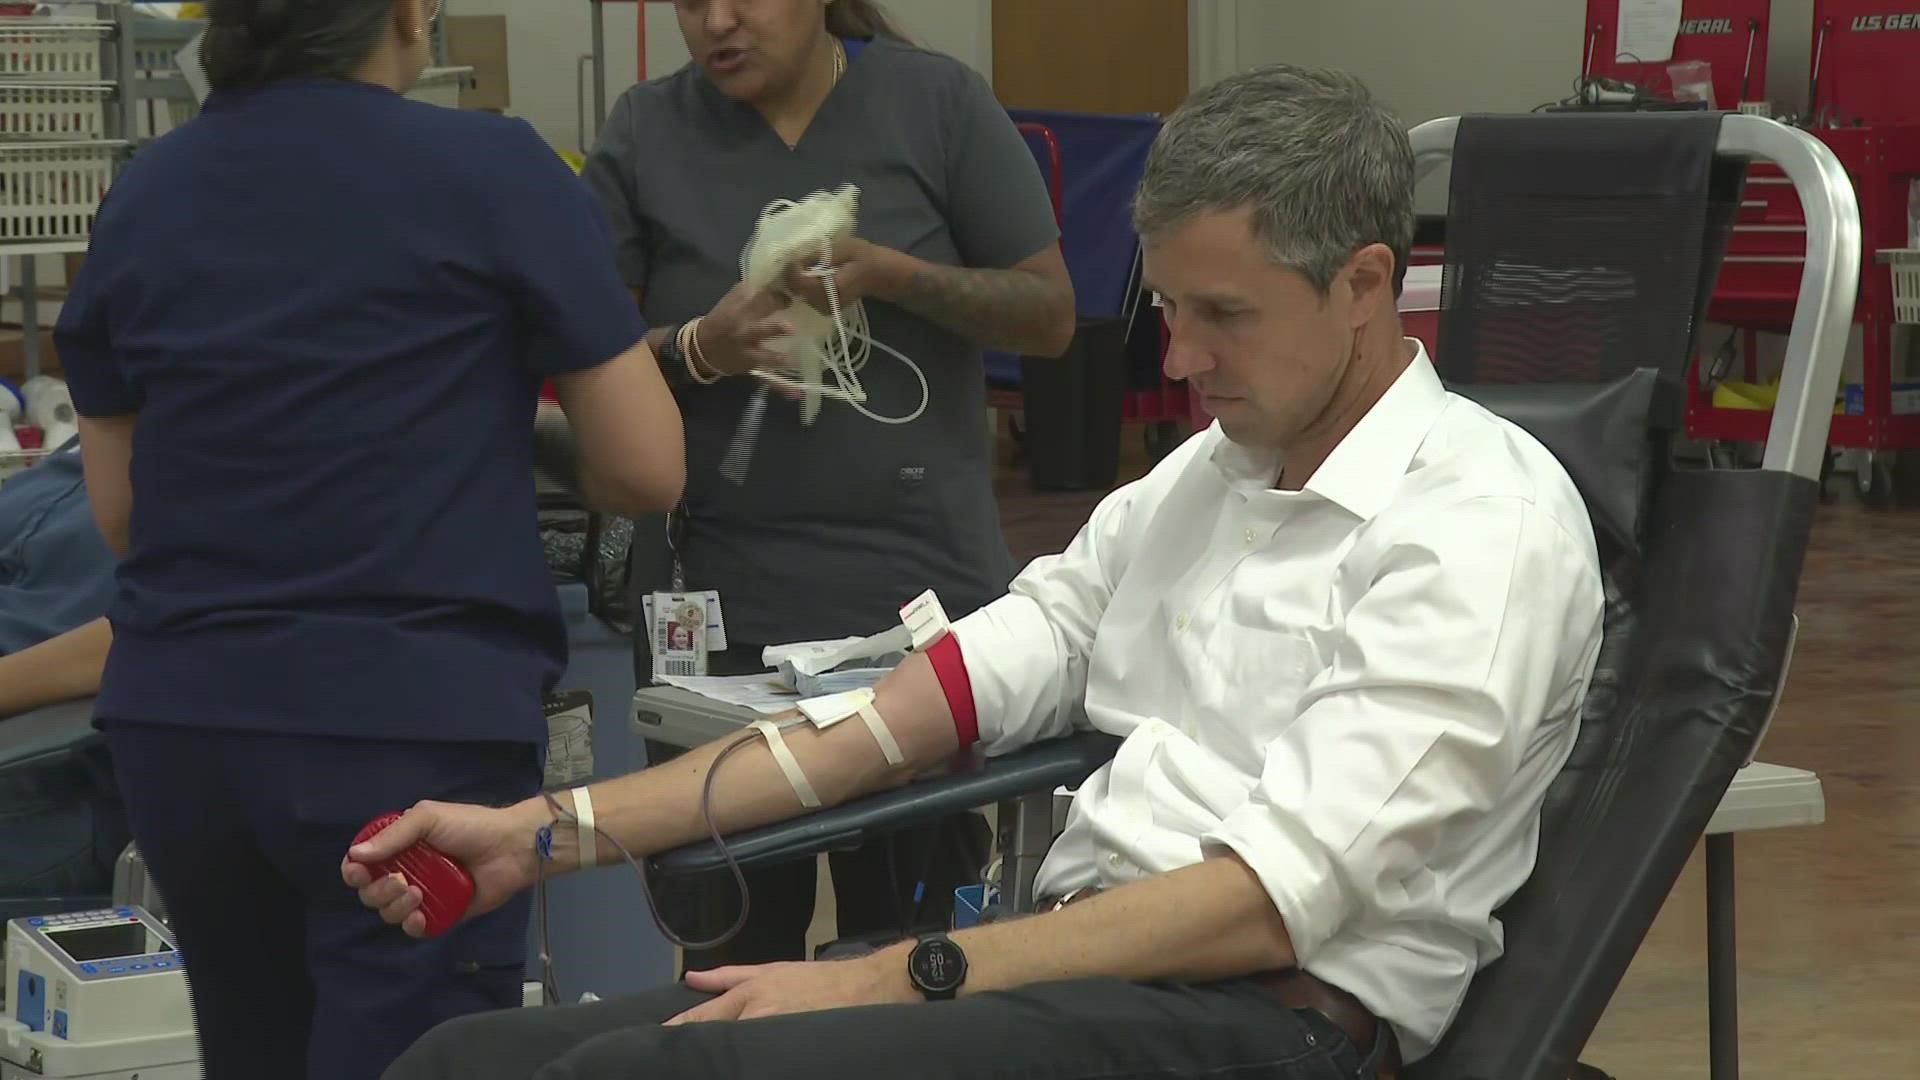 Trae the Truth caught up with Democratic governor candidate Beto O'Rourke while he was giving blood in Uvalde, Texas following a mass shooting.